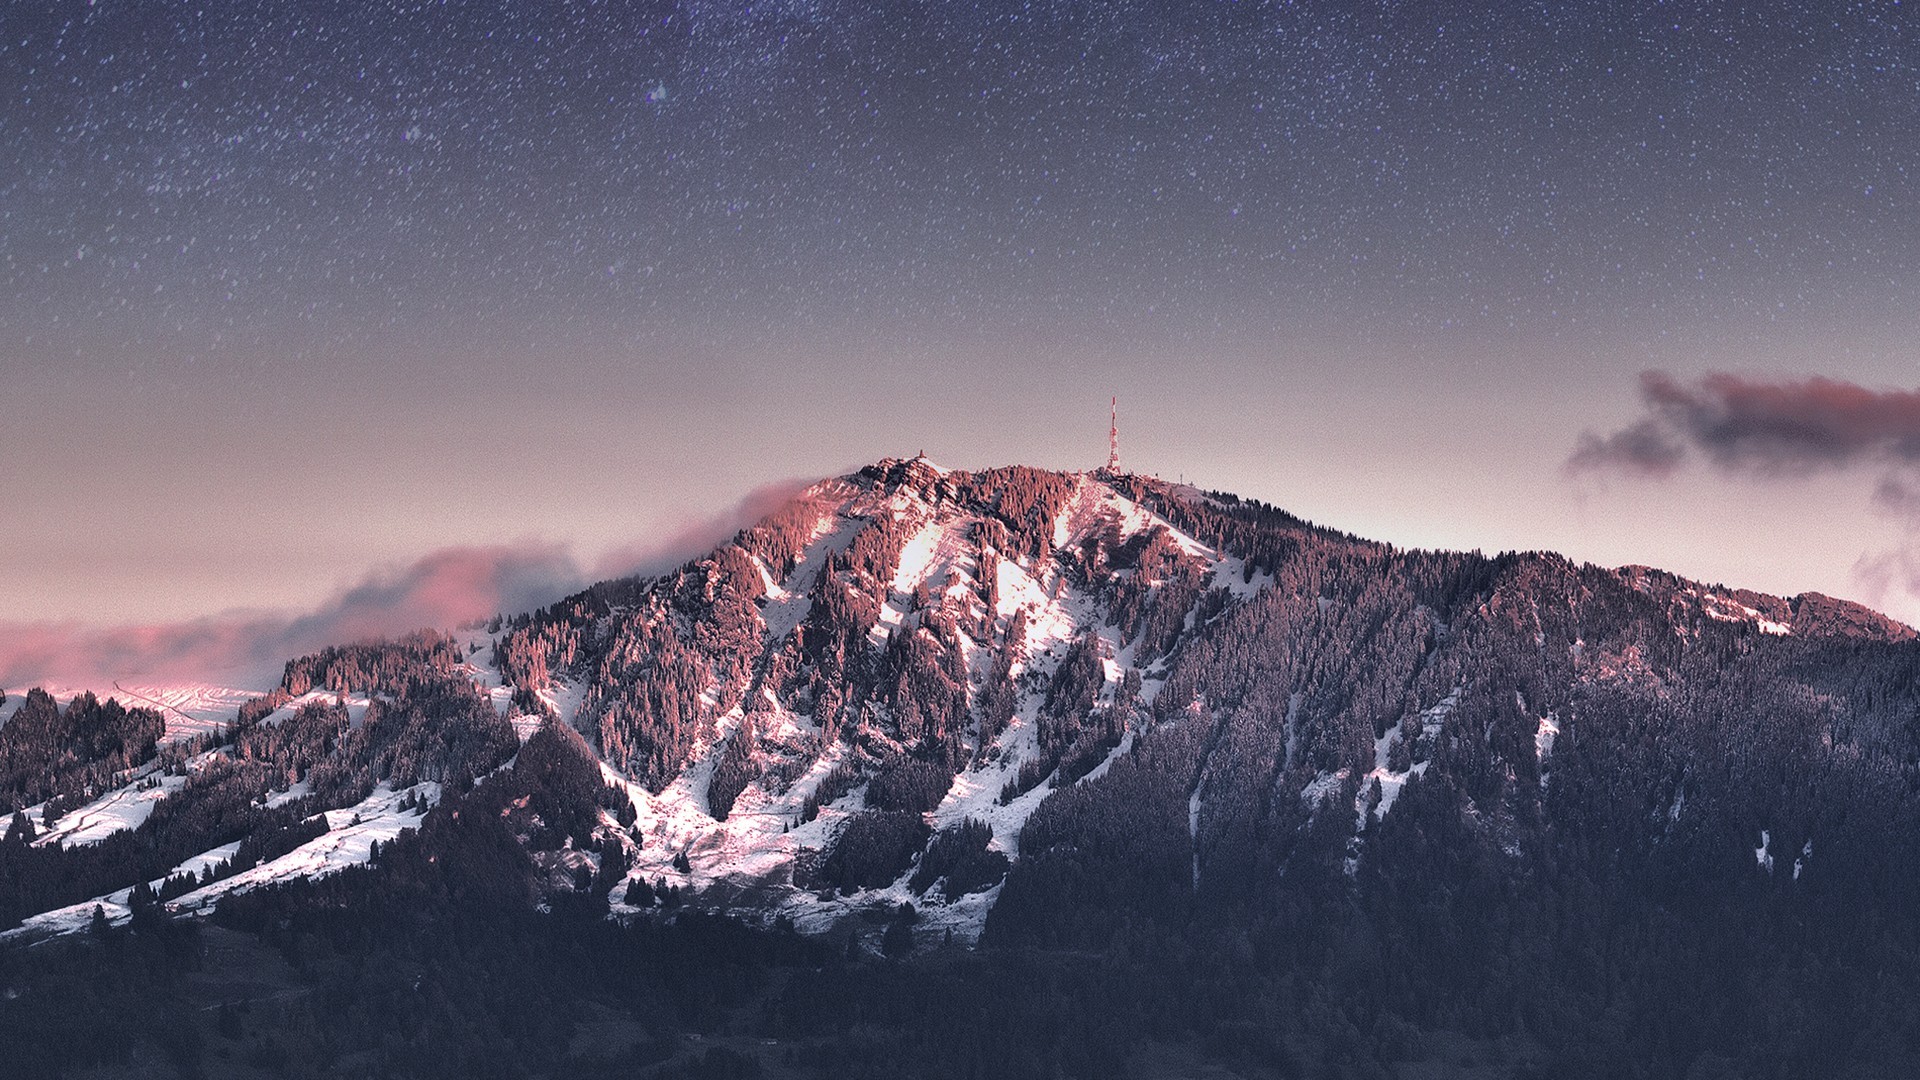 General 1920x1080 nature landscape mountains night low saturation